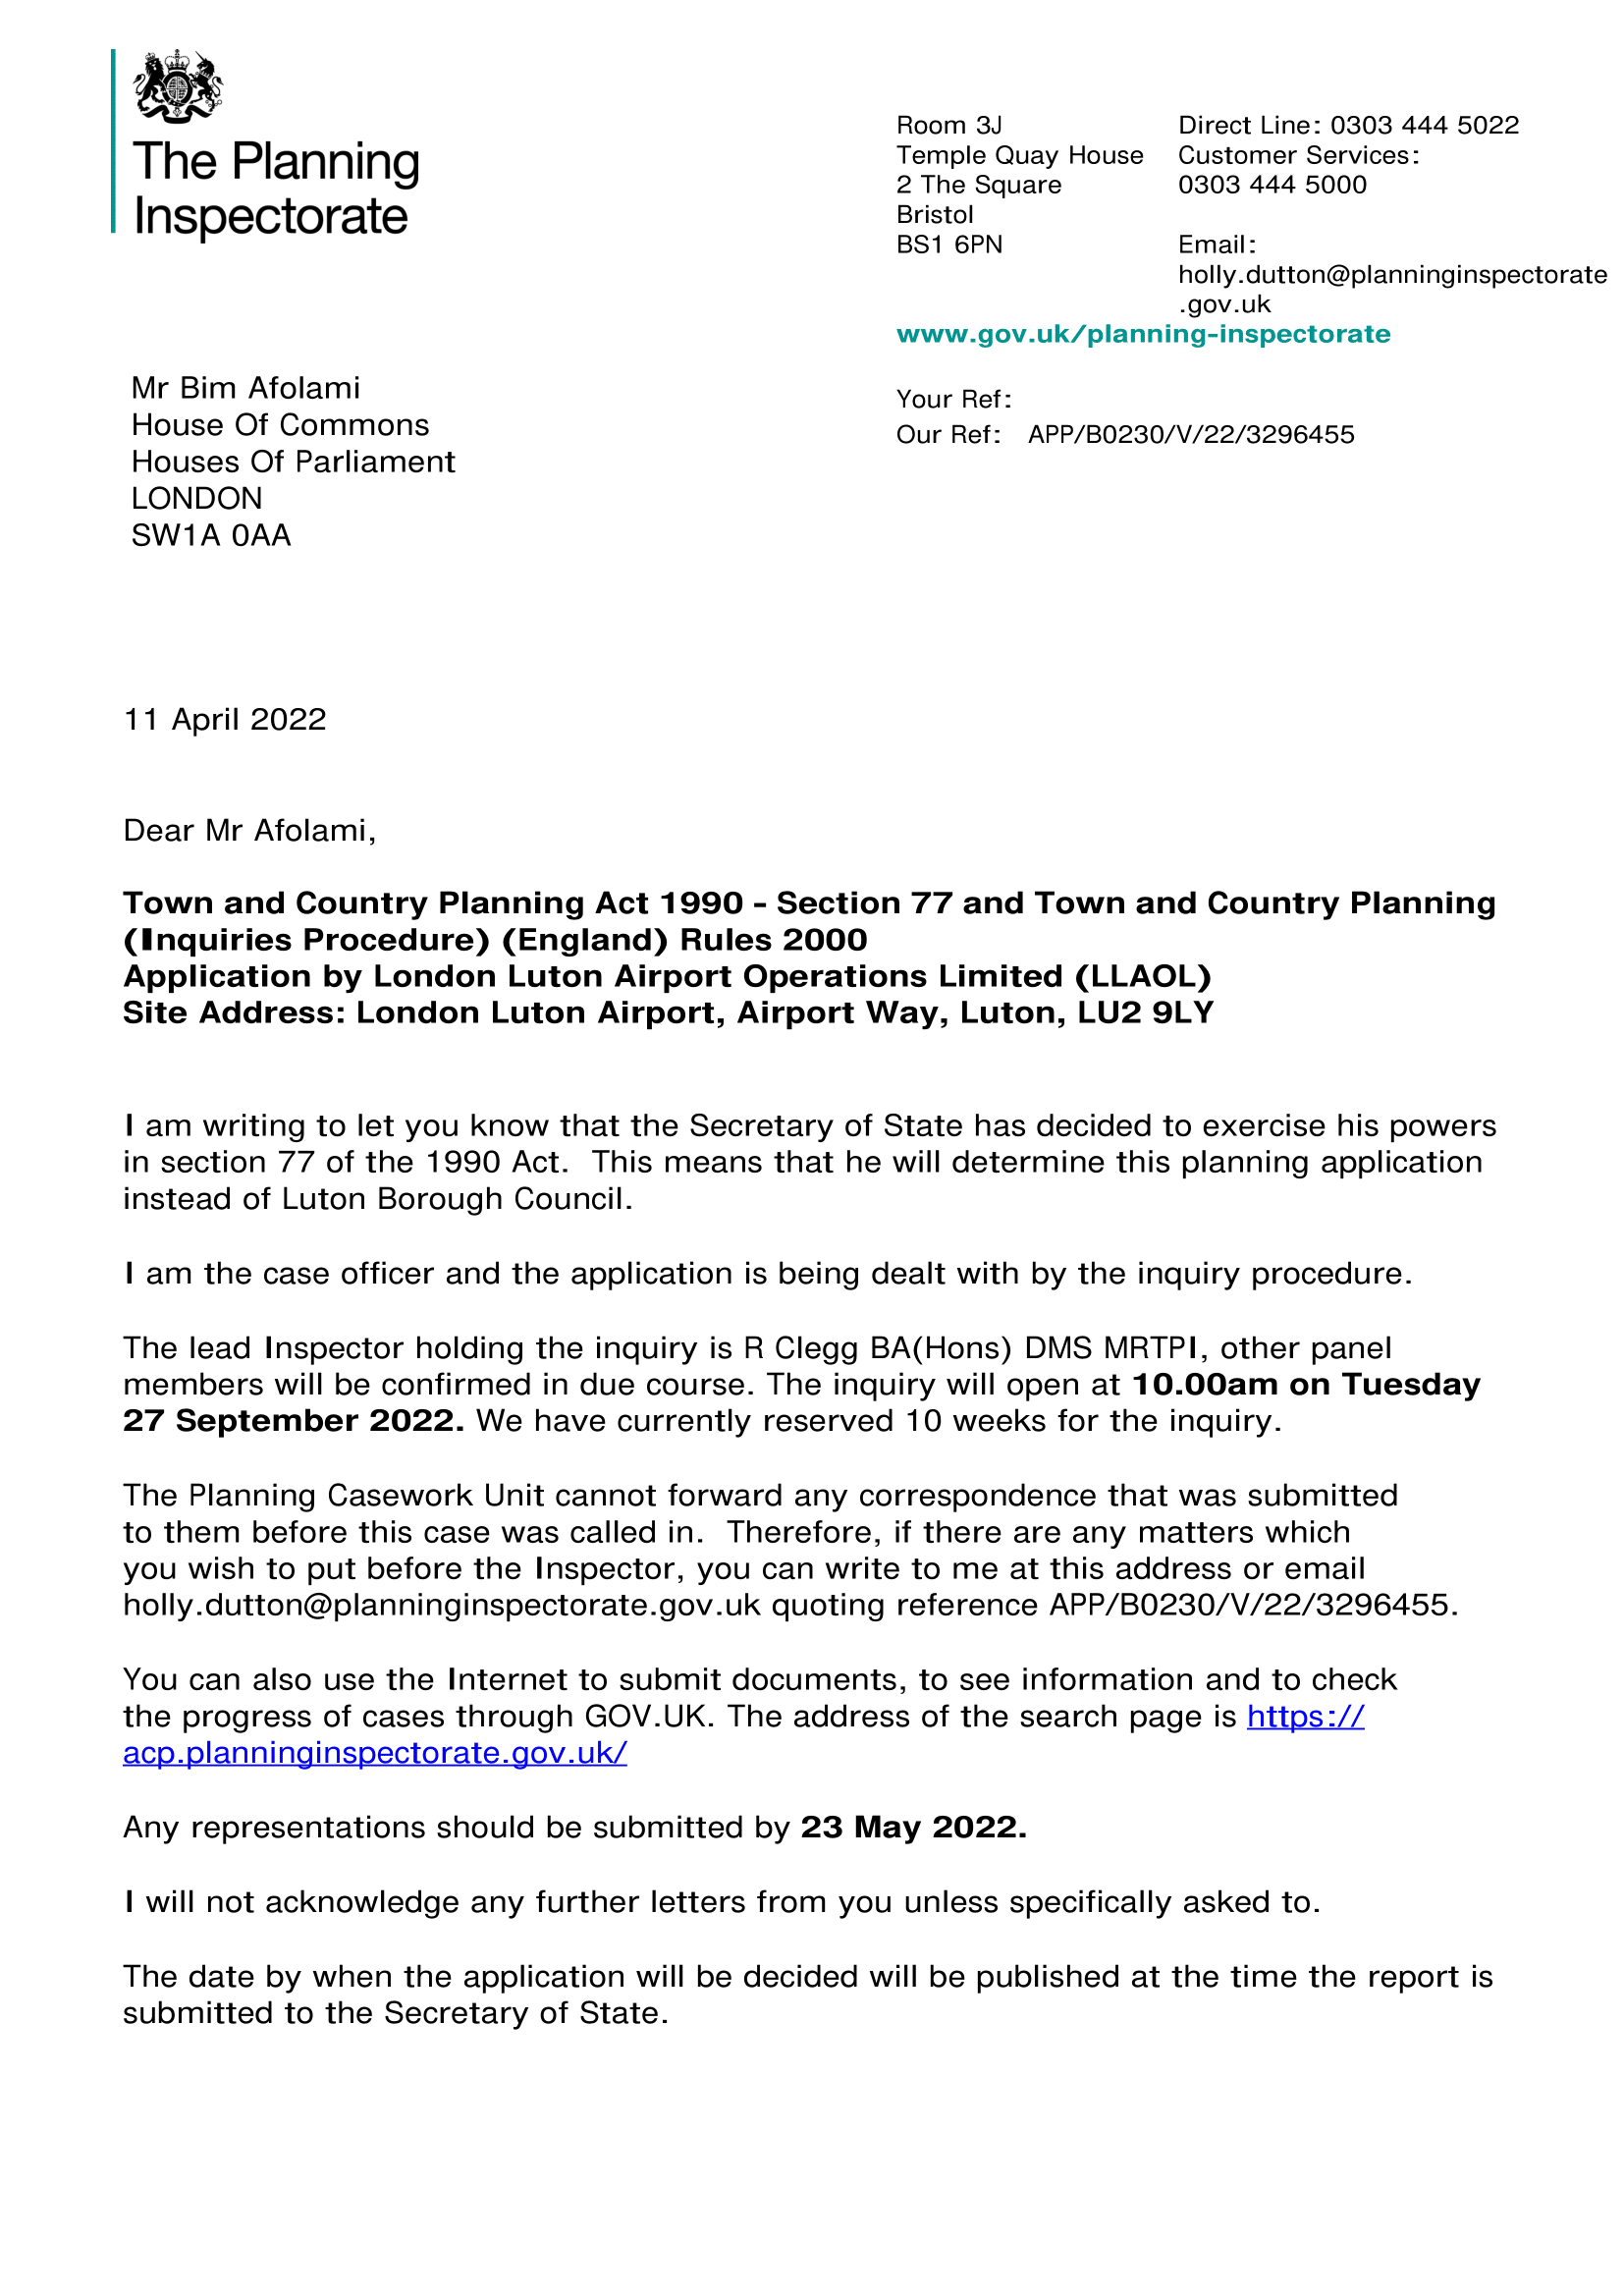 Letter from The Planning Inspectorate